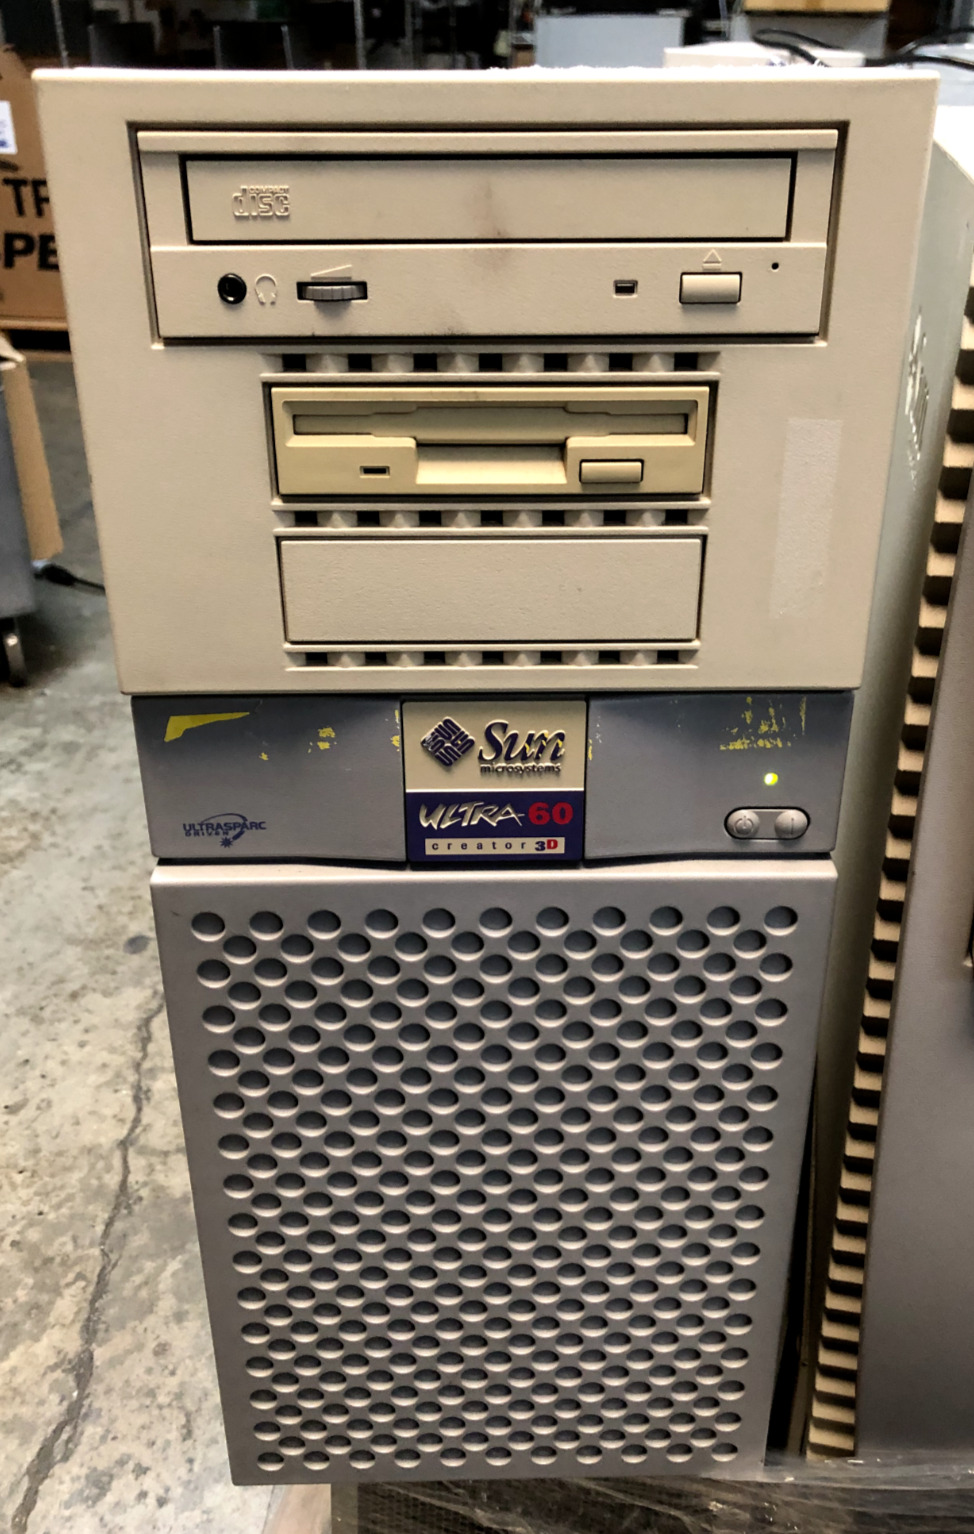 Sun Microsystems Ultra 60 Creator 3D For Parts